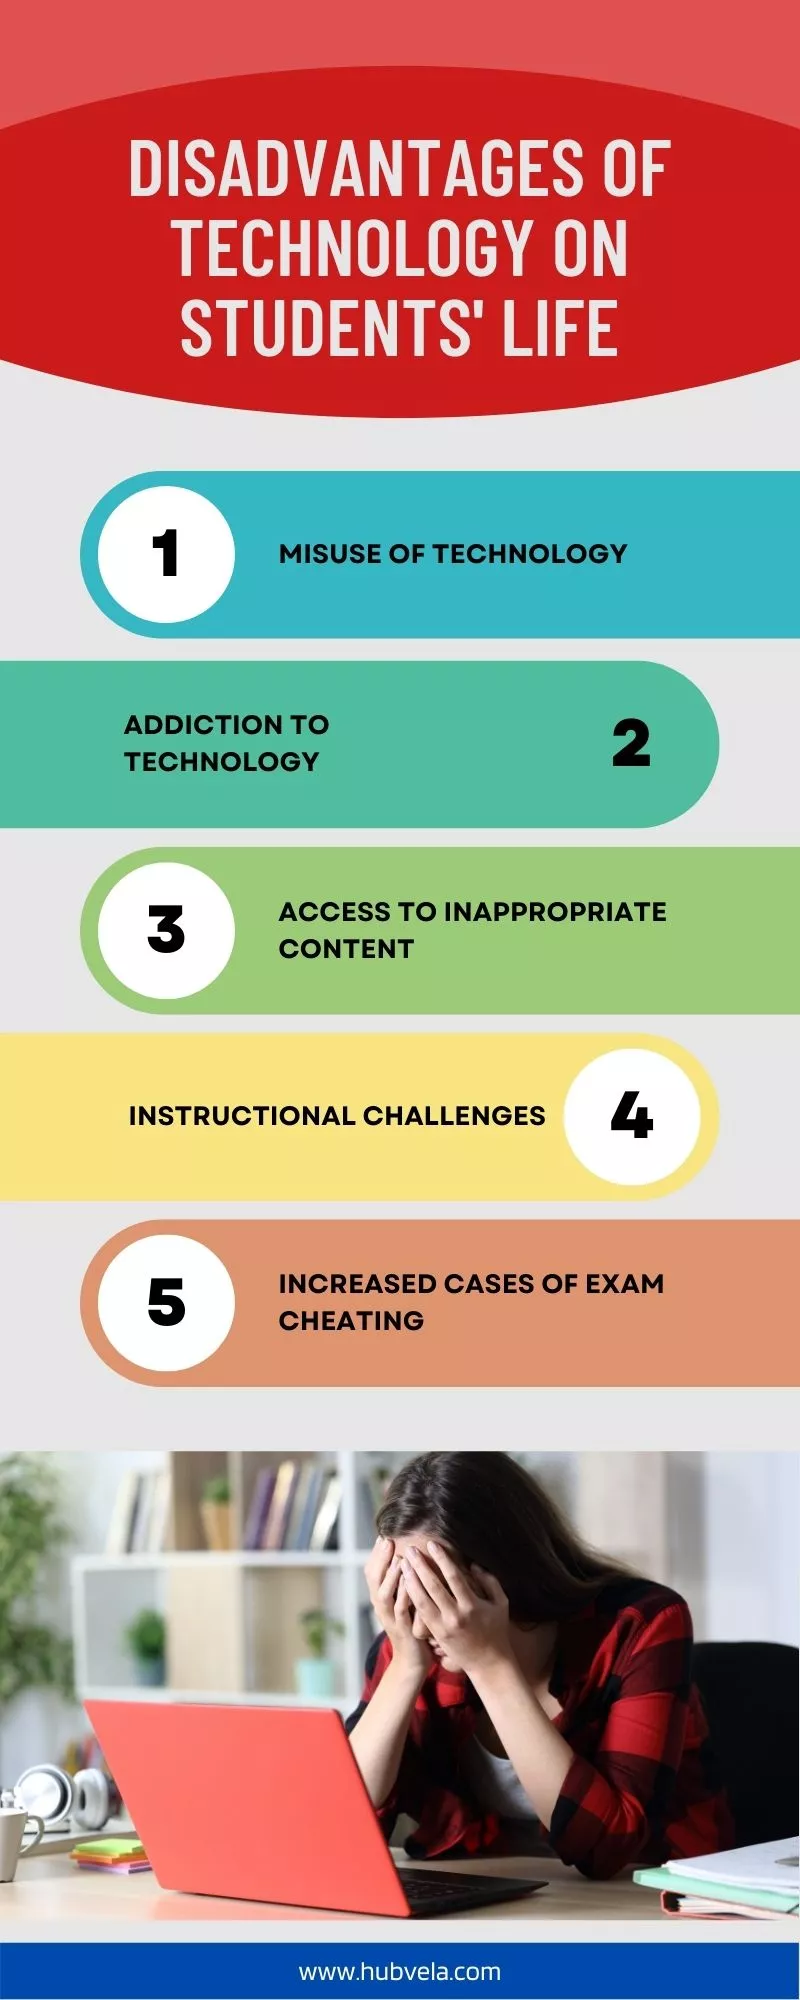 Disadvantages of Technology in Students Life infographic